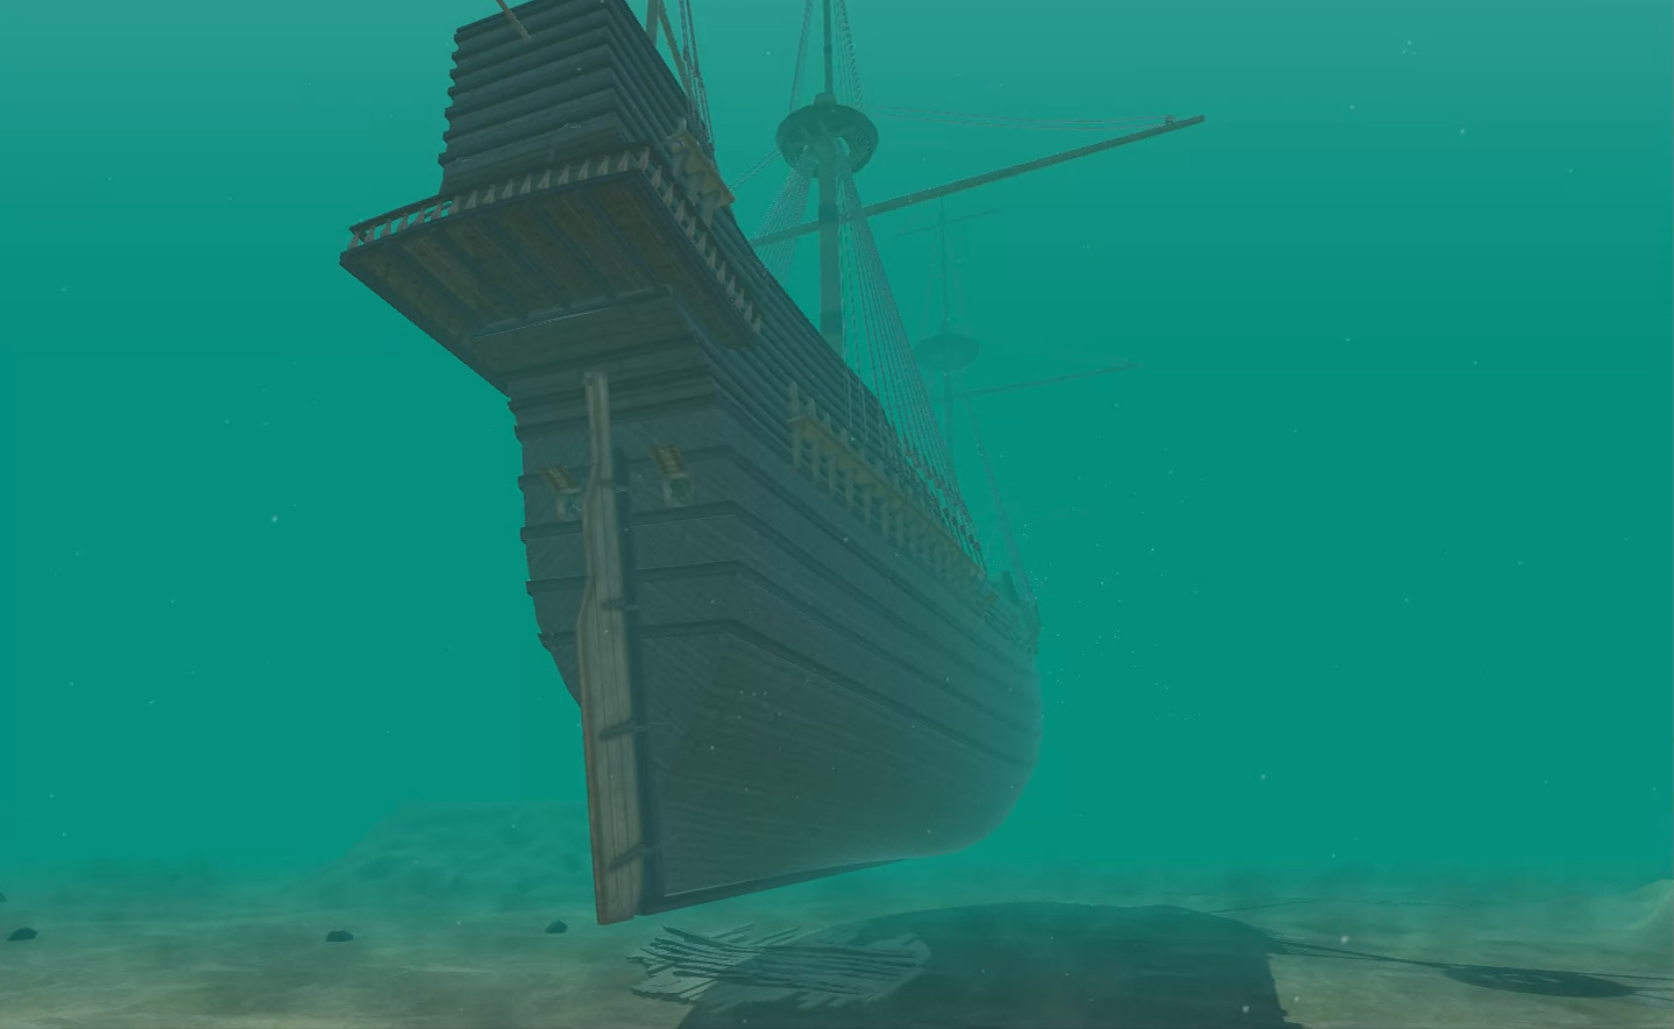 A Virtual Visit to the Pepper Wreck - The Nautical Archaeology Digital ...